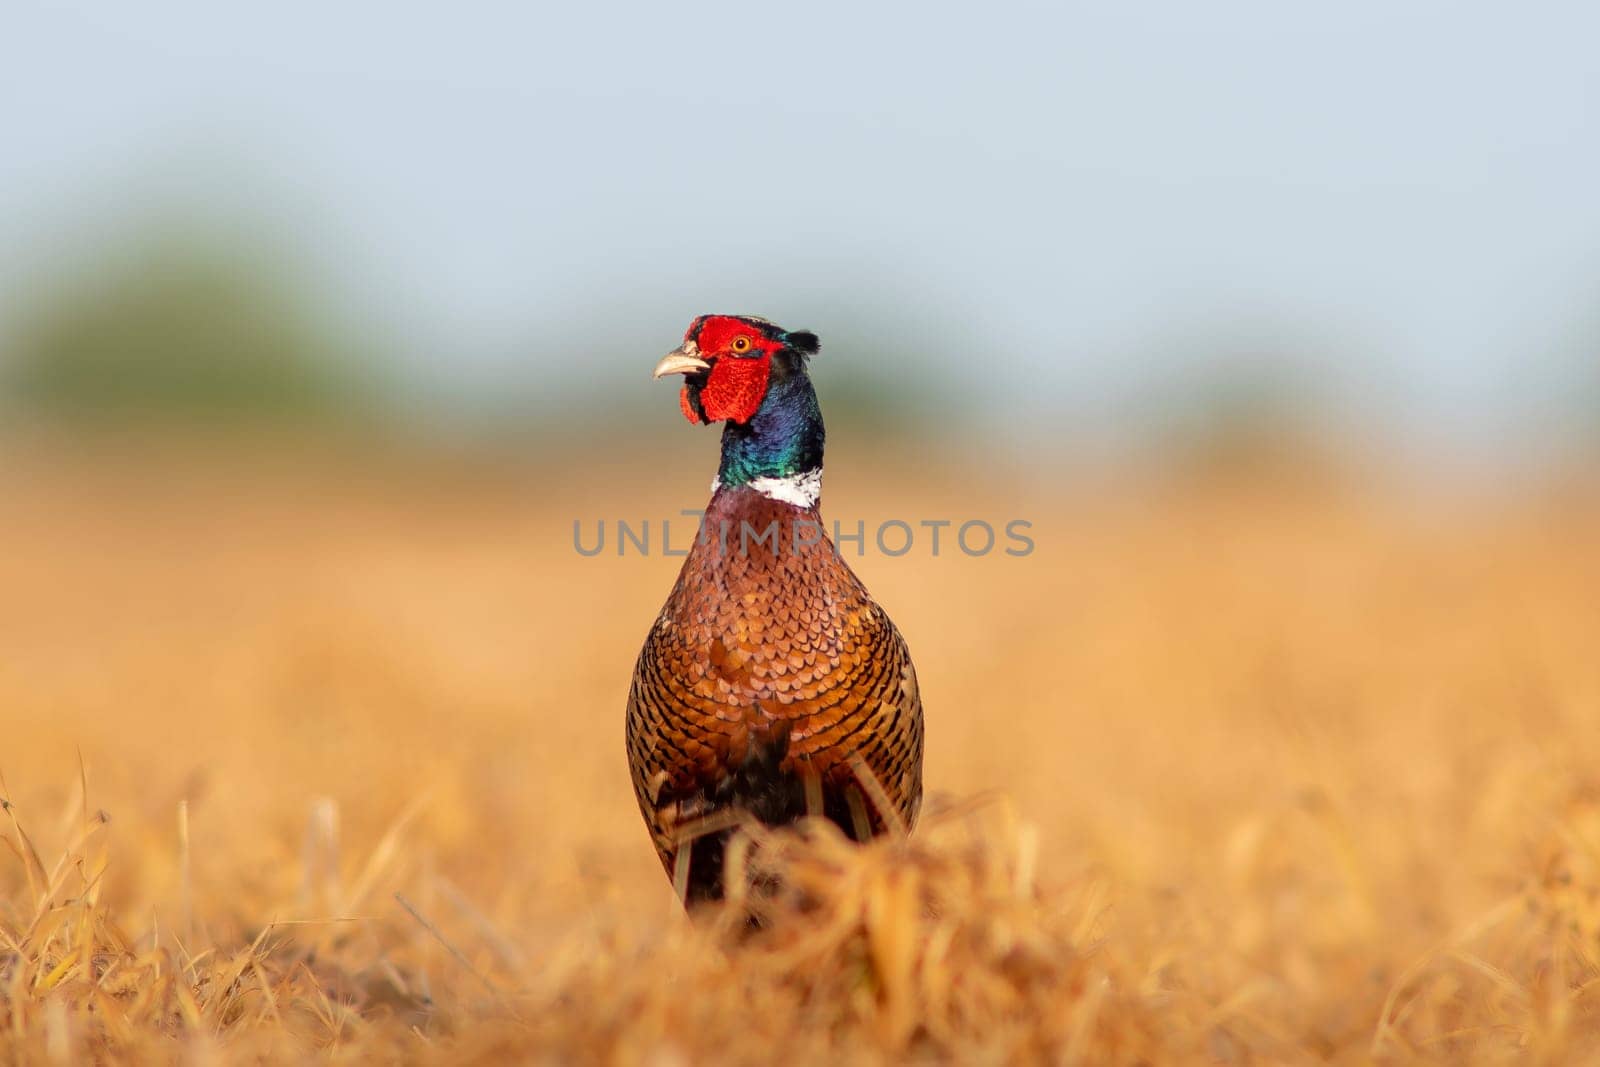 a Rooster pheasant (Phasianus colchicus) stands in a harvested field